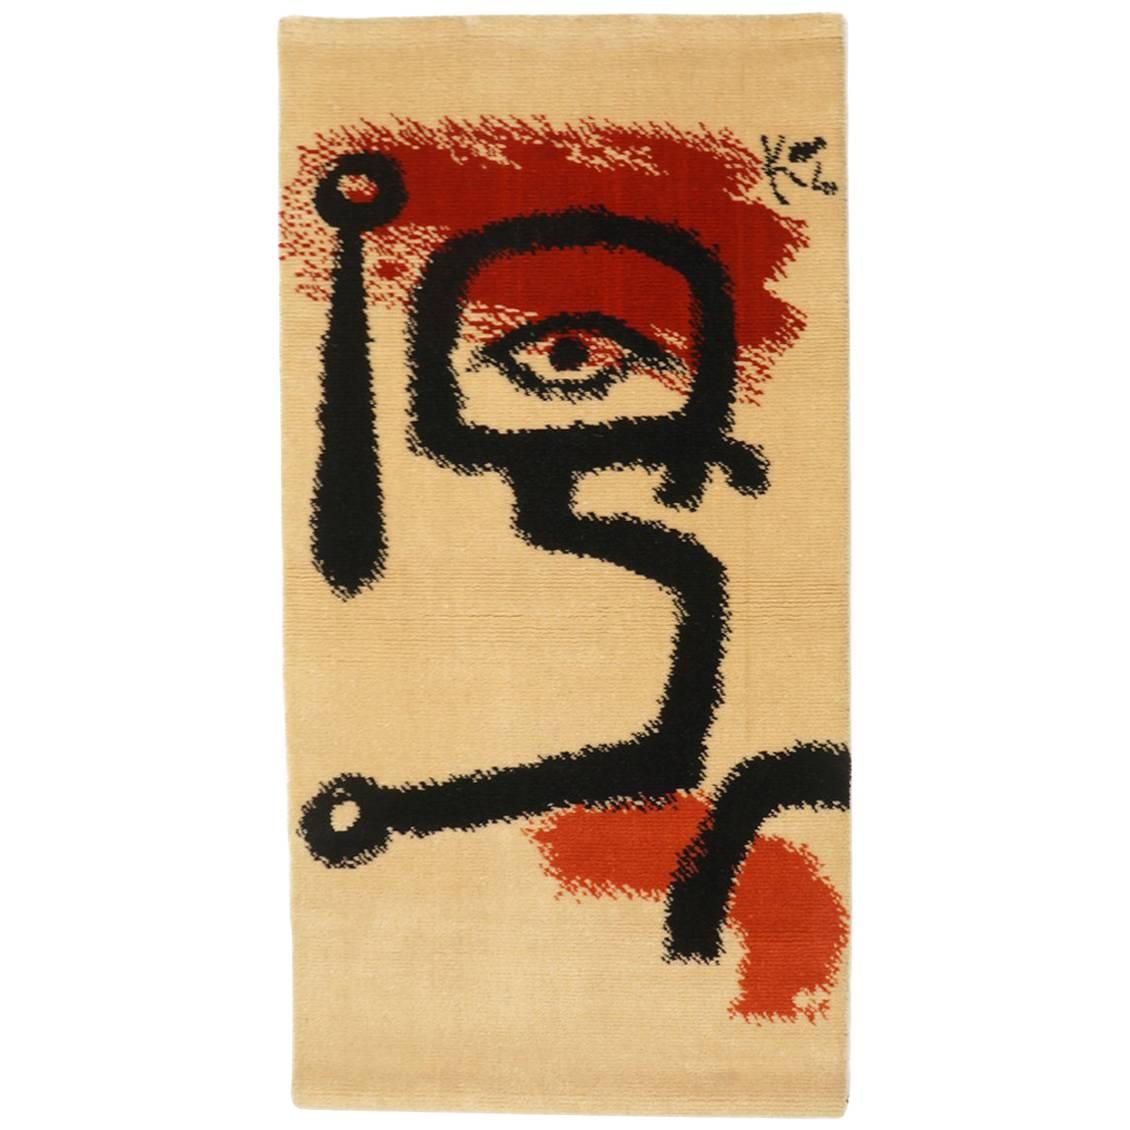 The Drummer Boy, after Paul Klee, edition 1729/2500